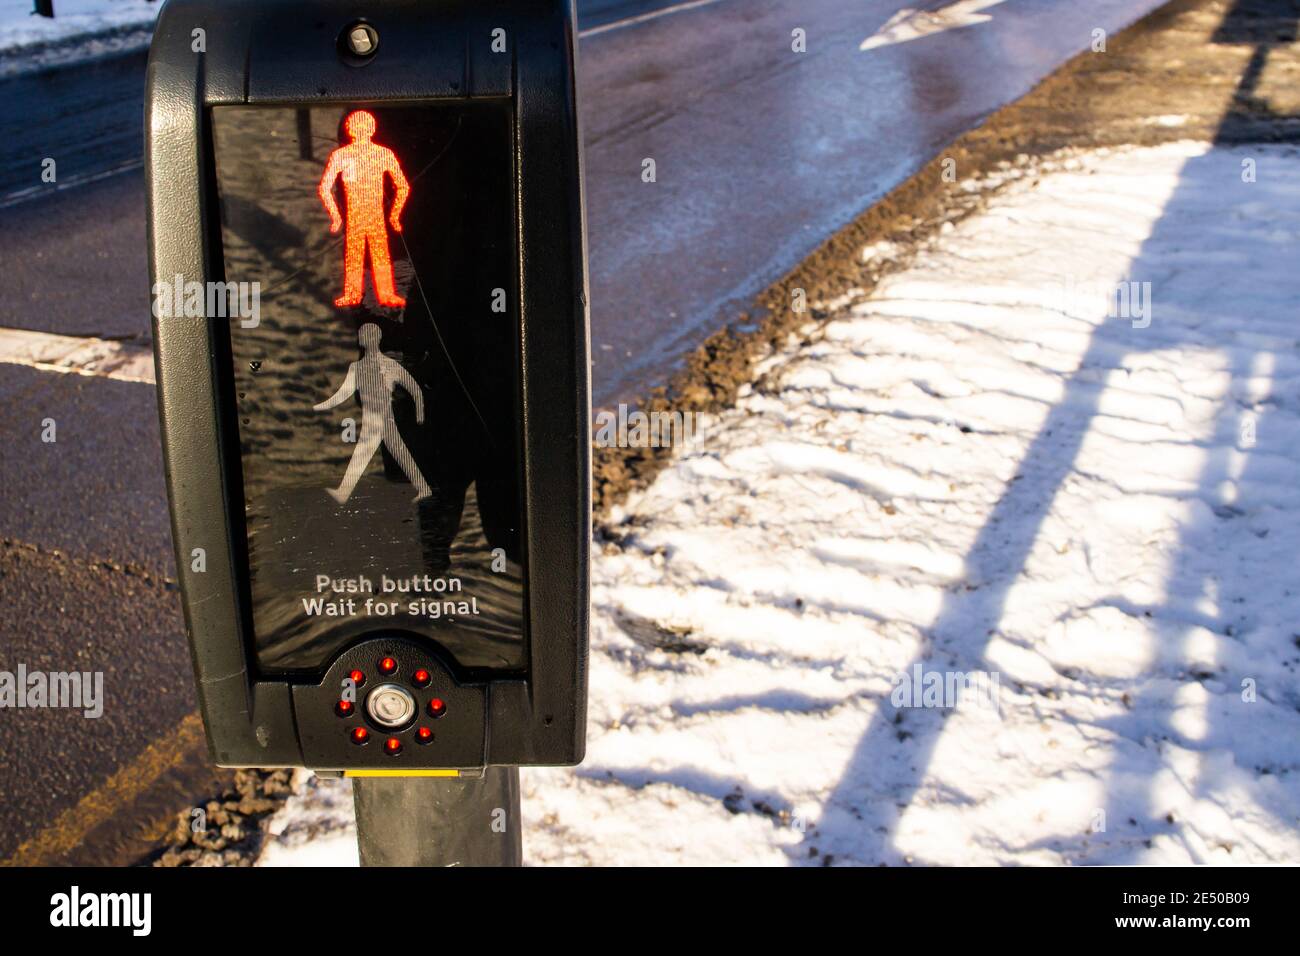 Pedestrian crossing push button, UK, red man showing, in snowy weather Stock Photo